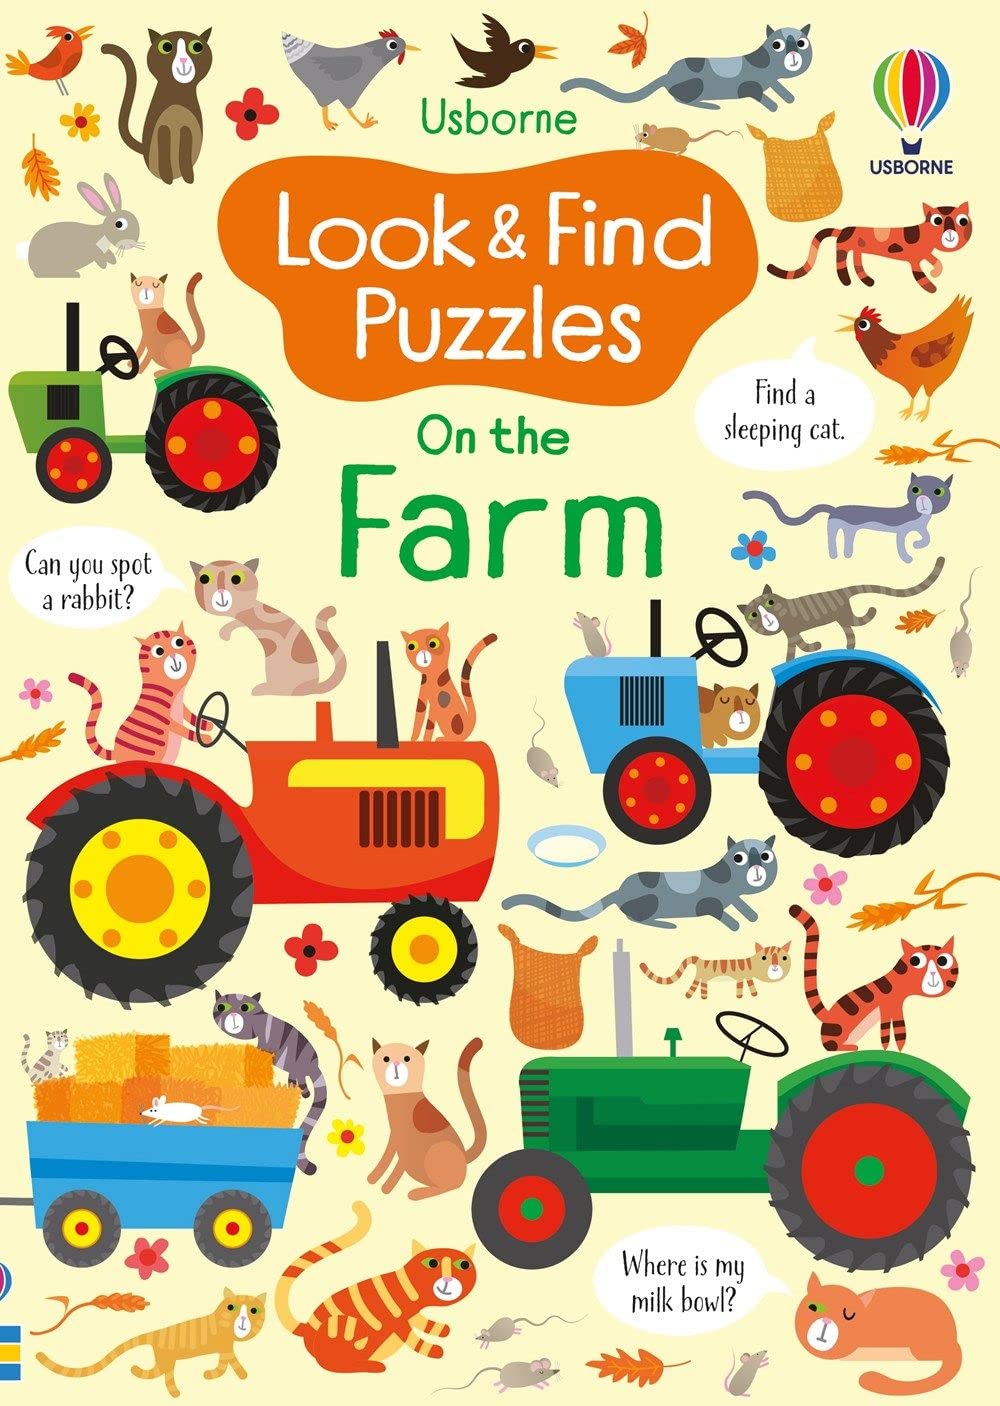 Look & Find Puzzles On The Farm